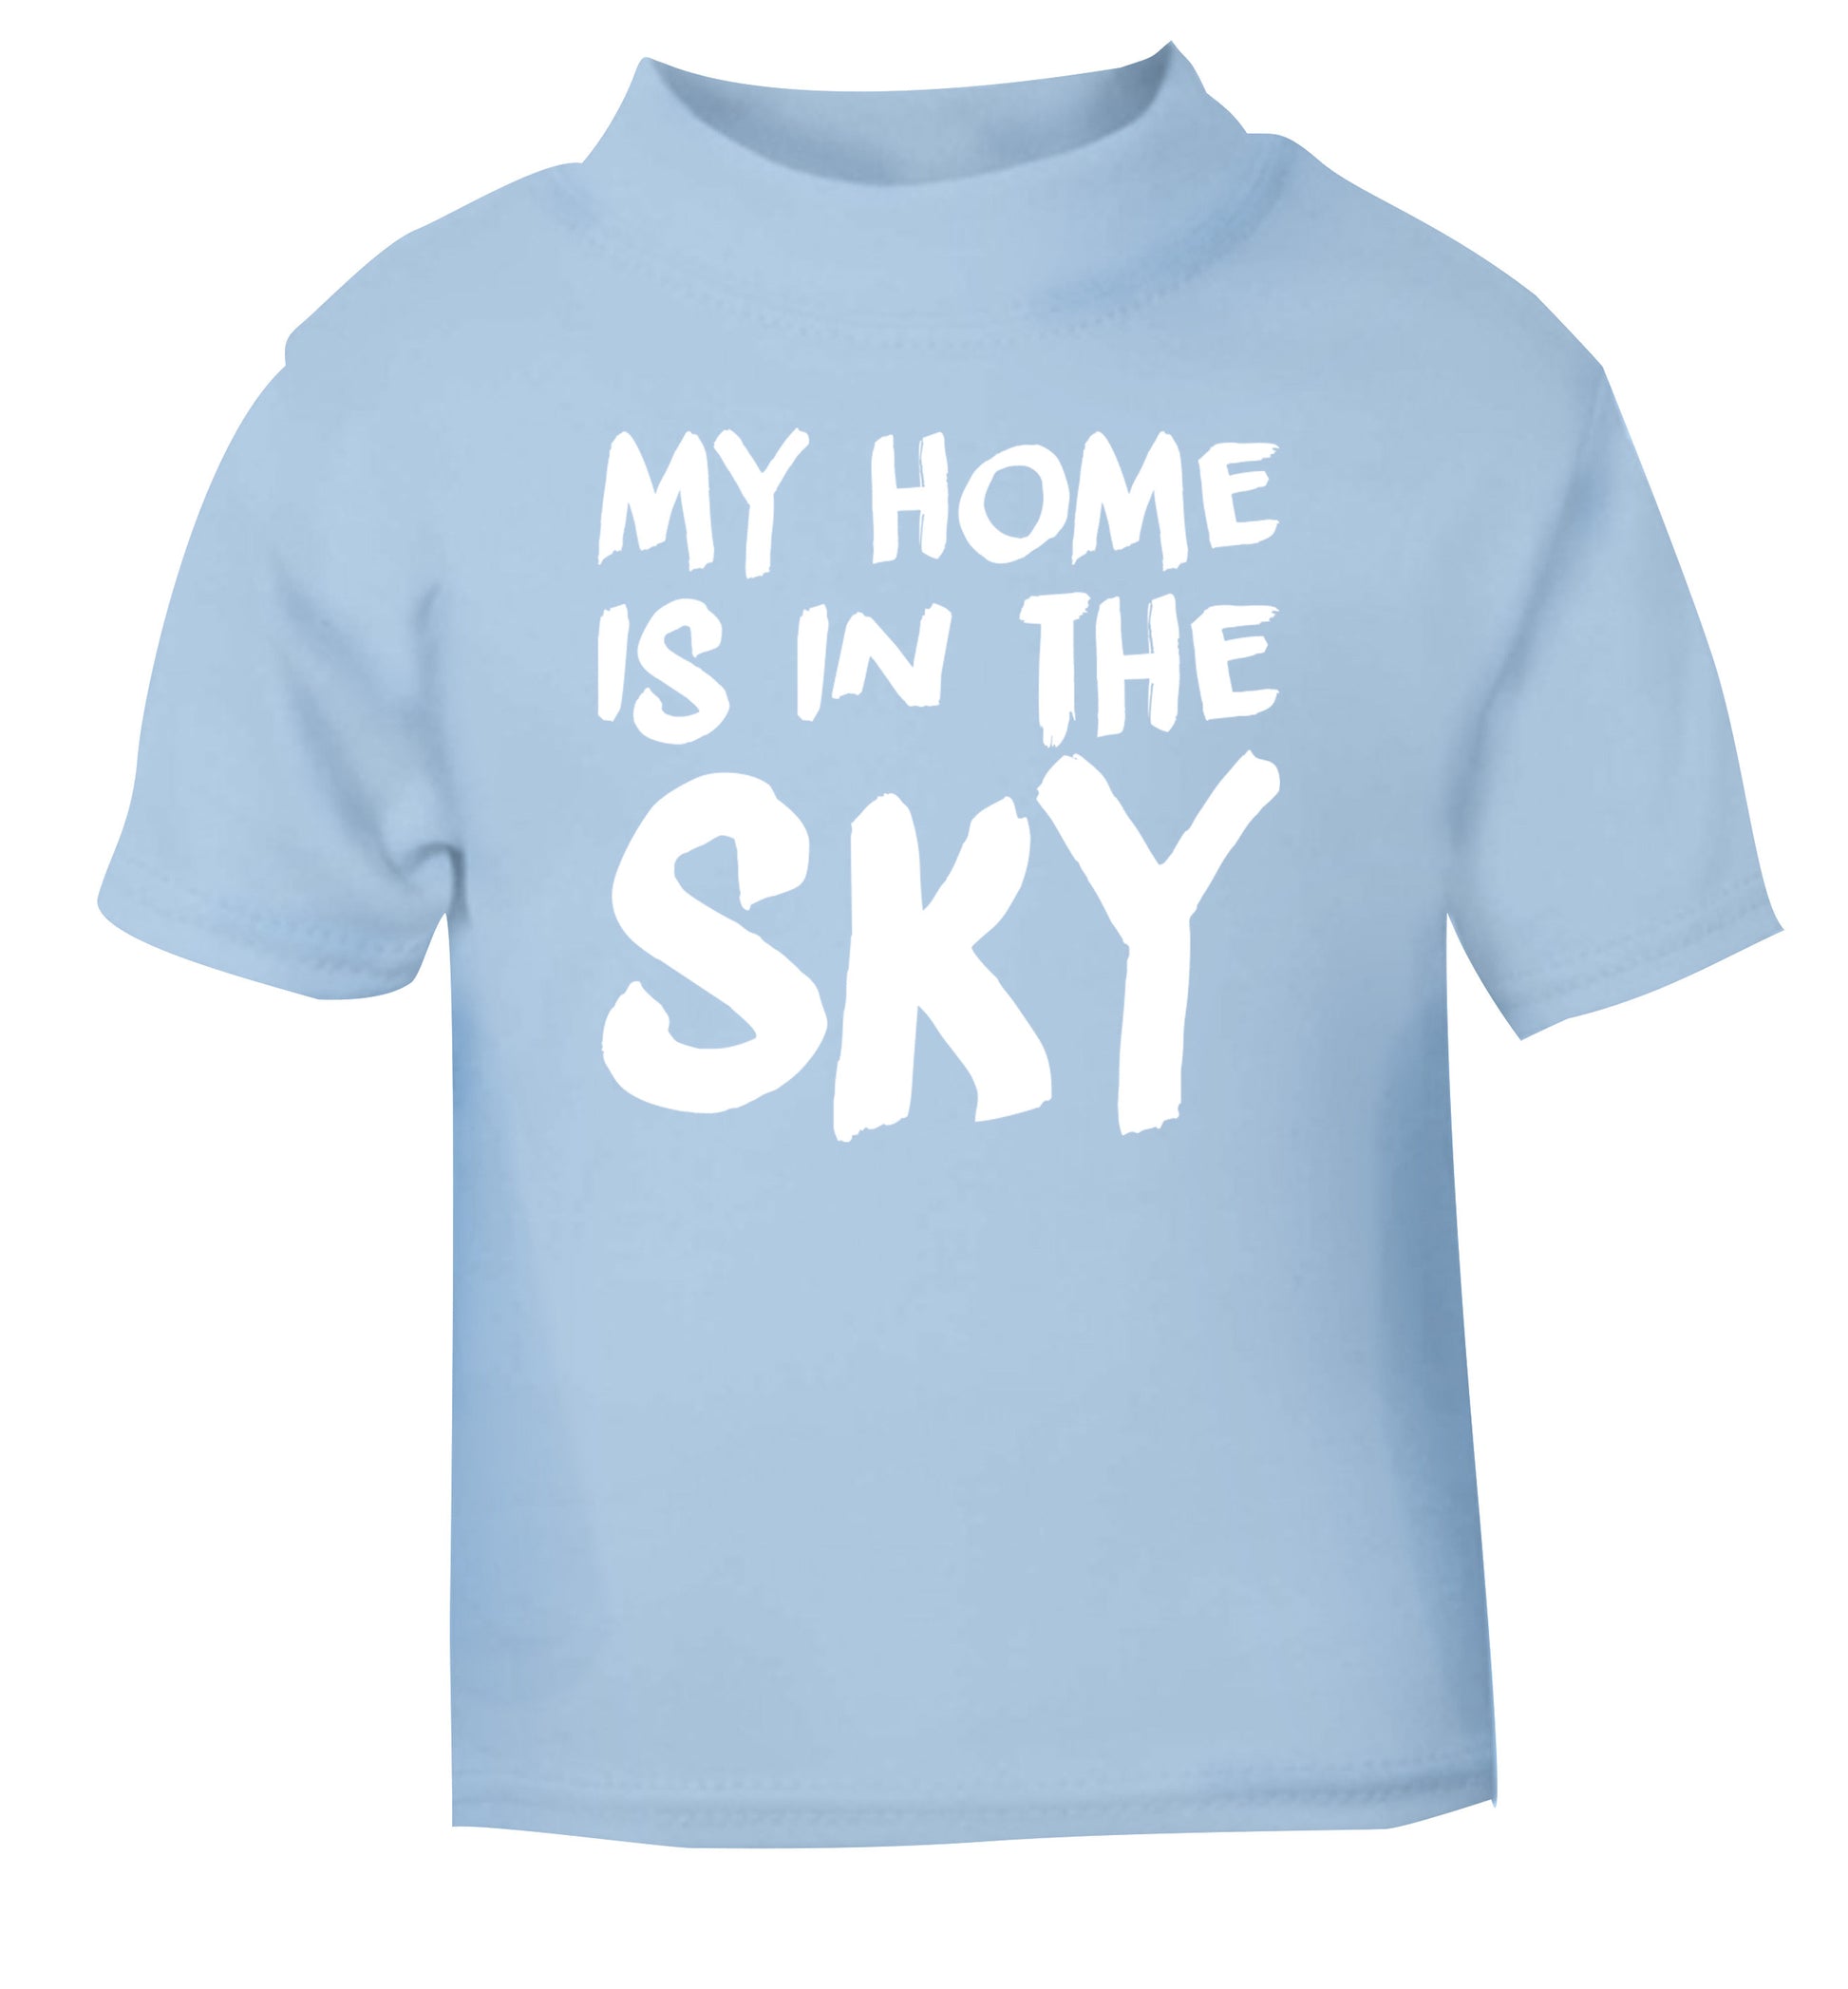 My home is in the sky light blue Baby Toddler Tshirt 2 Years